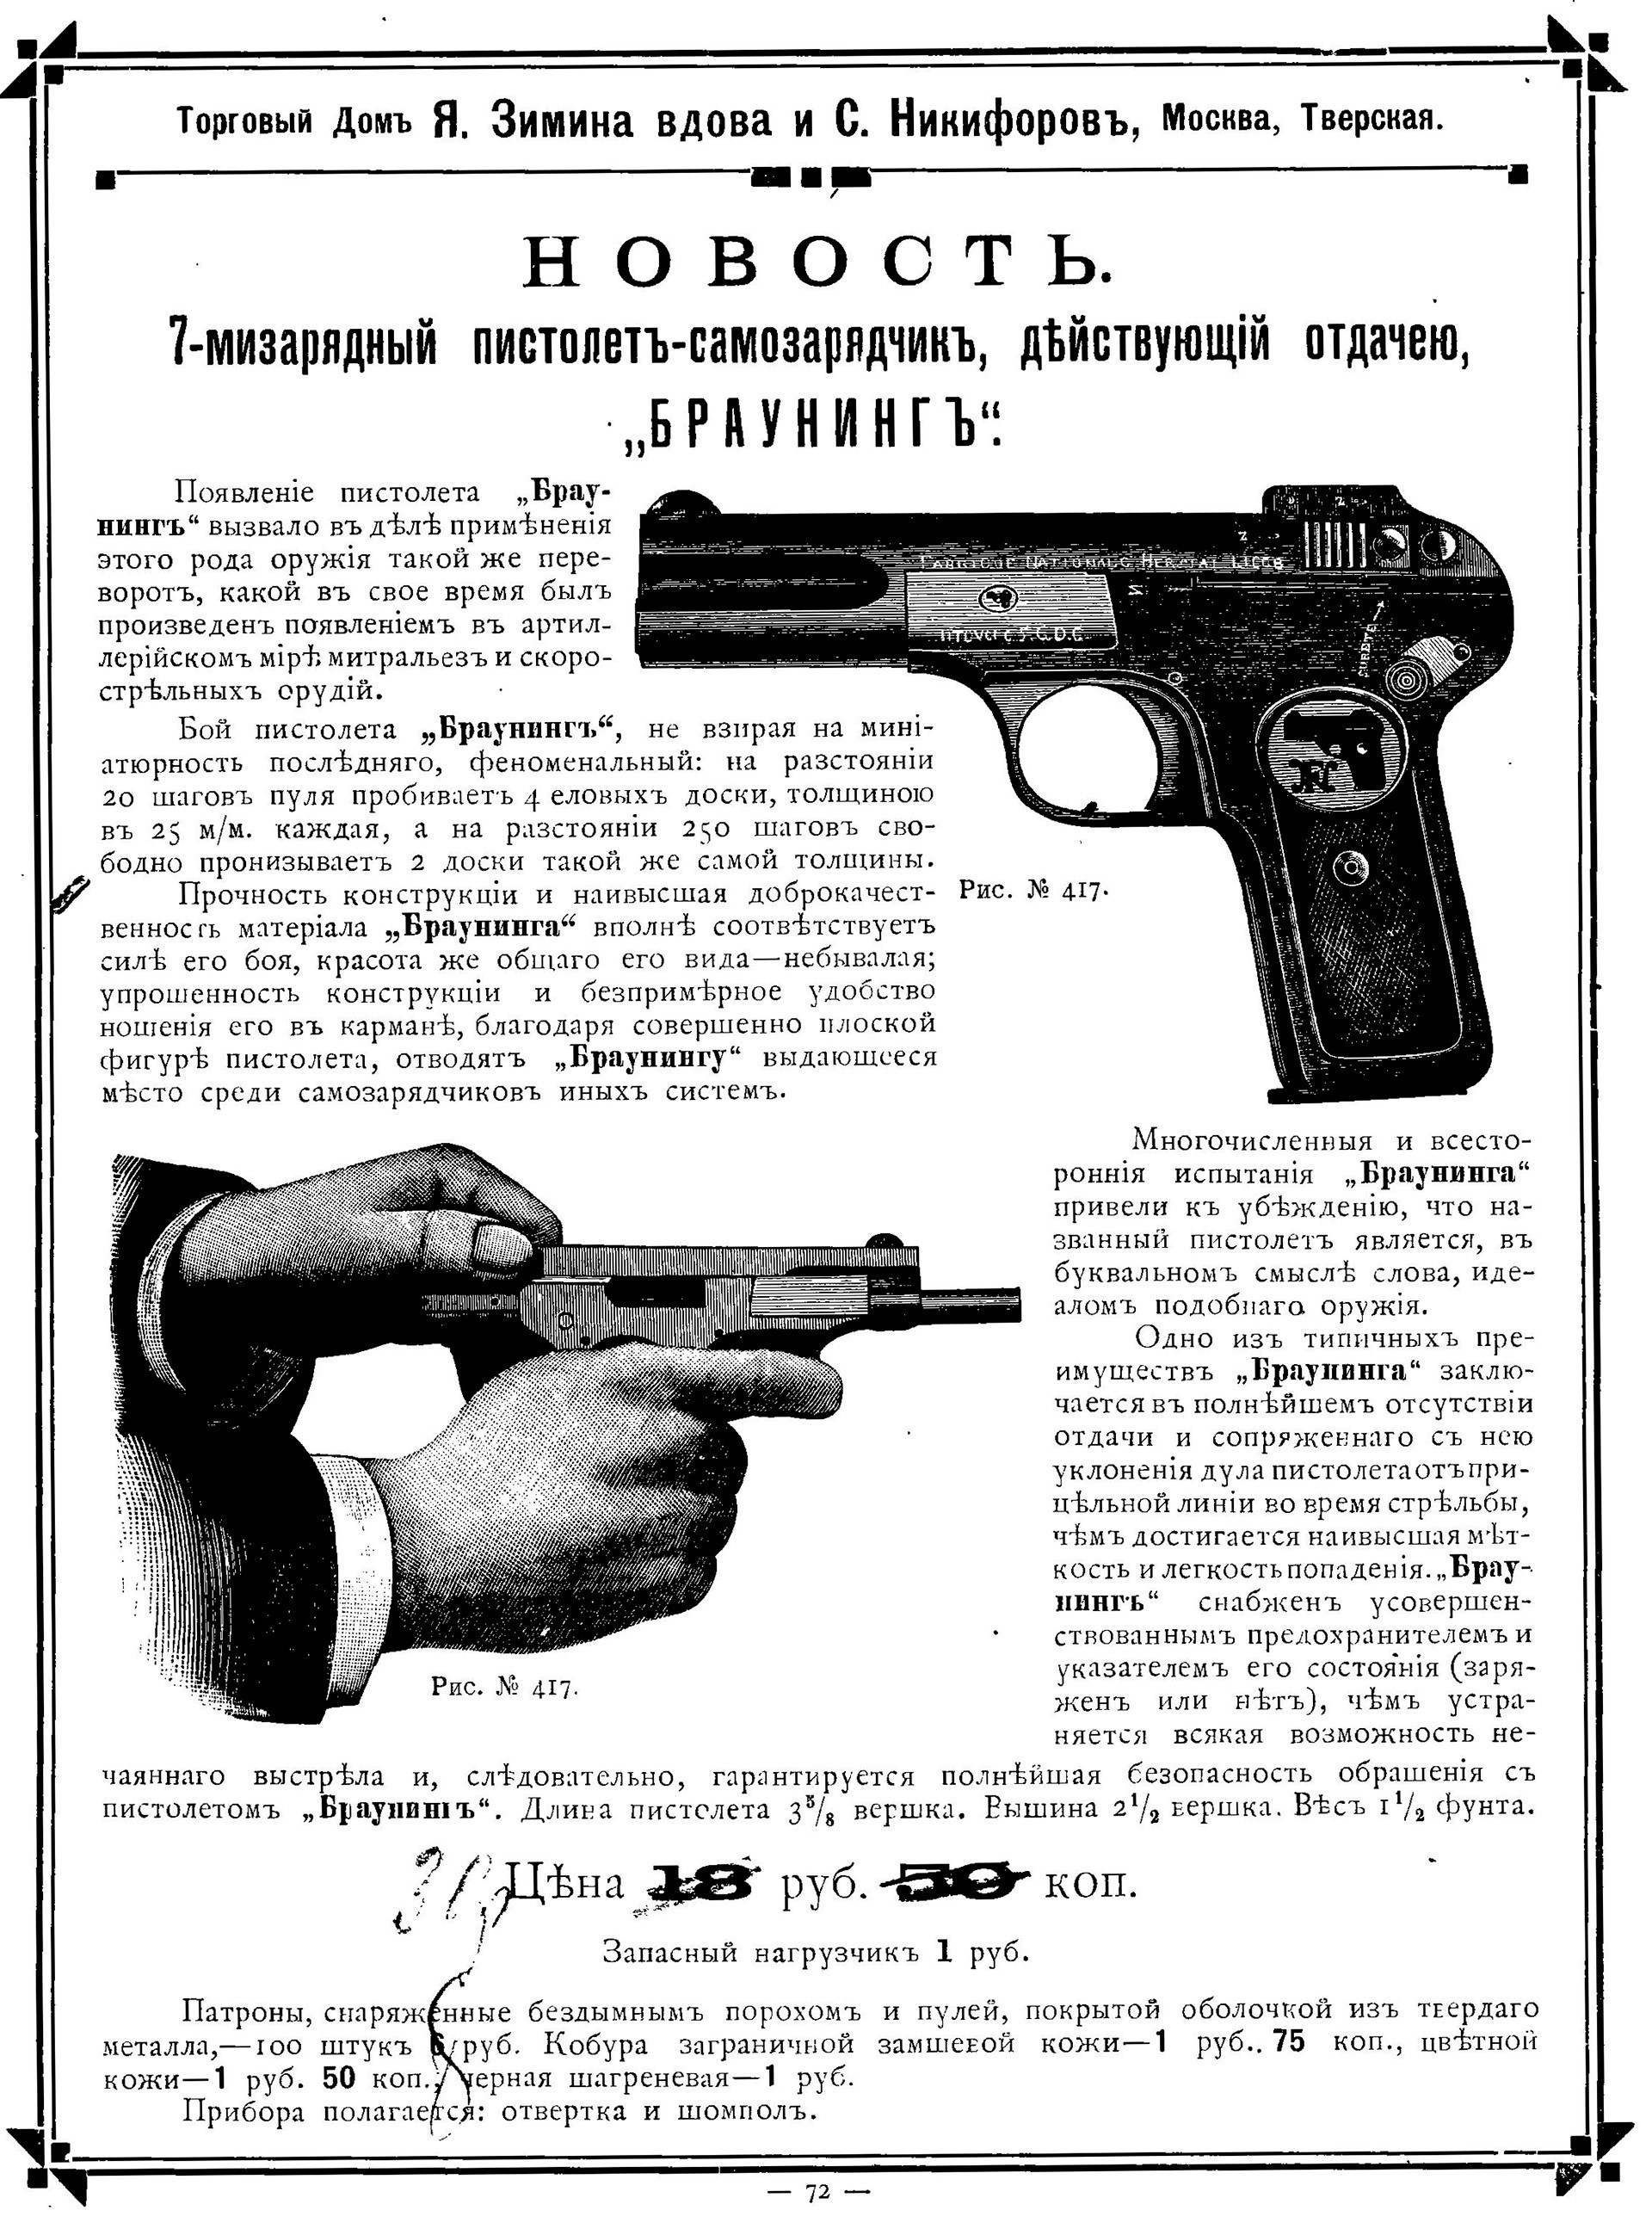 Newspapers advertised Brownings, Nagants, Mausers, and other models of handgun which were as popular as they were affordable.
Newspapers advertised Brownings, Nagants, Mausers, and other models of handgun which were as popular as they were affordable.